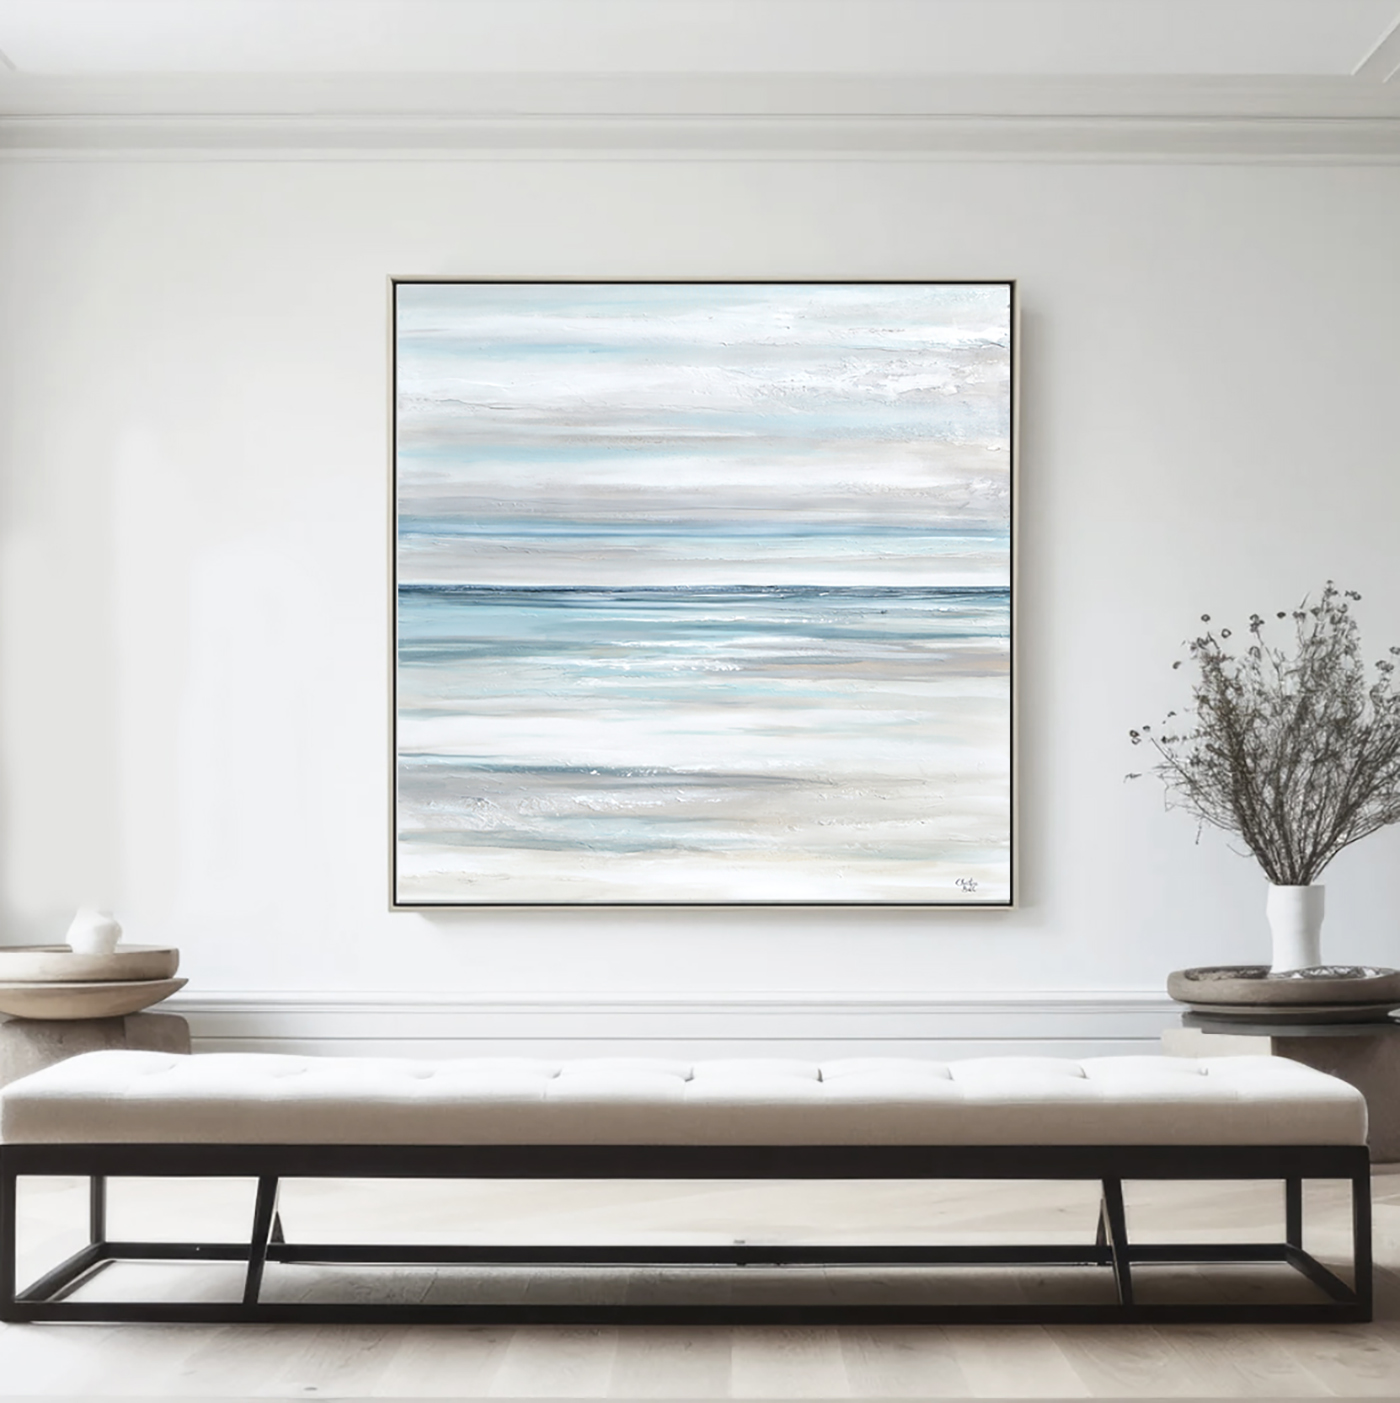 Fine Art Giclée Prints of Neutral Coastal Paintings, Ocean, Seascape Inspired, Stretched Canvas Prints, High end Interior Designer Home Decor Wall Art, Neutral textured modern paintings, Contemporary Artist, Christine Bell